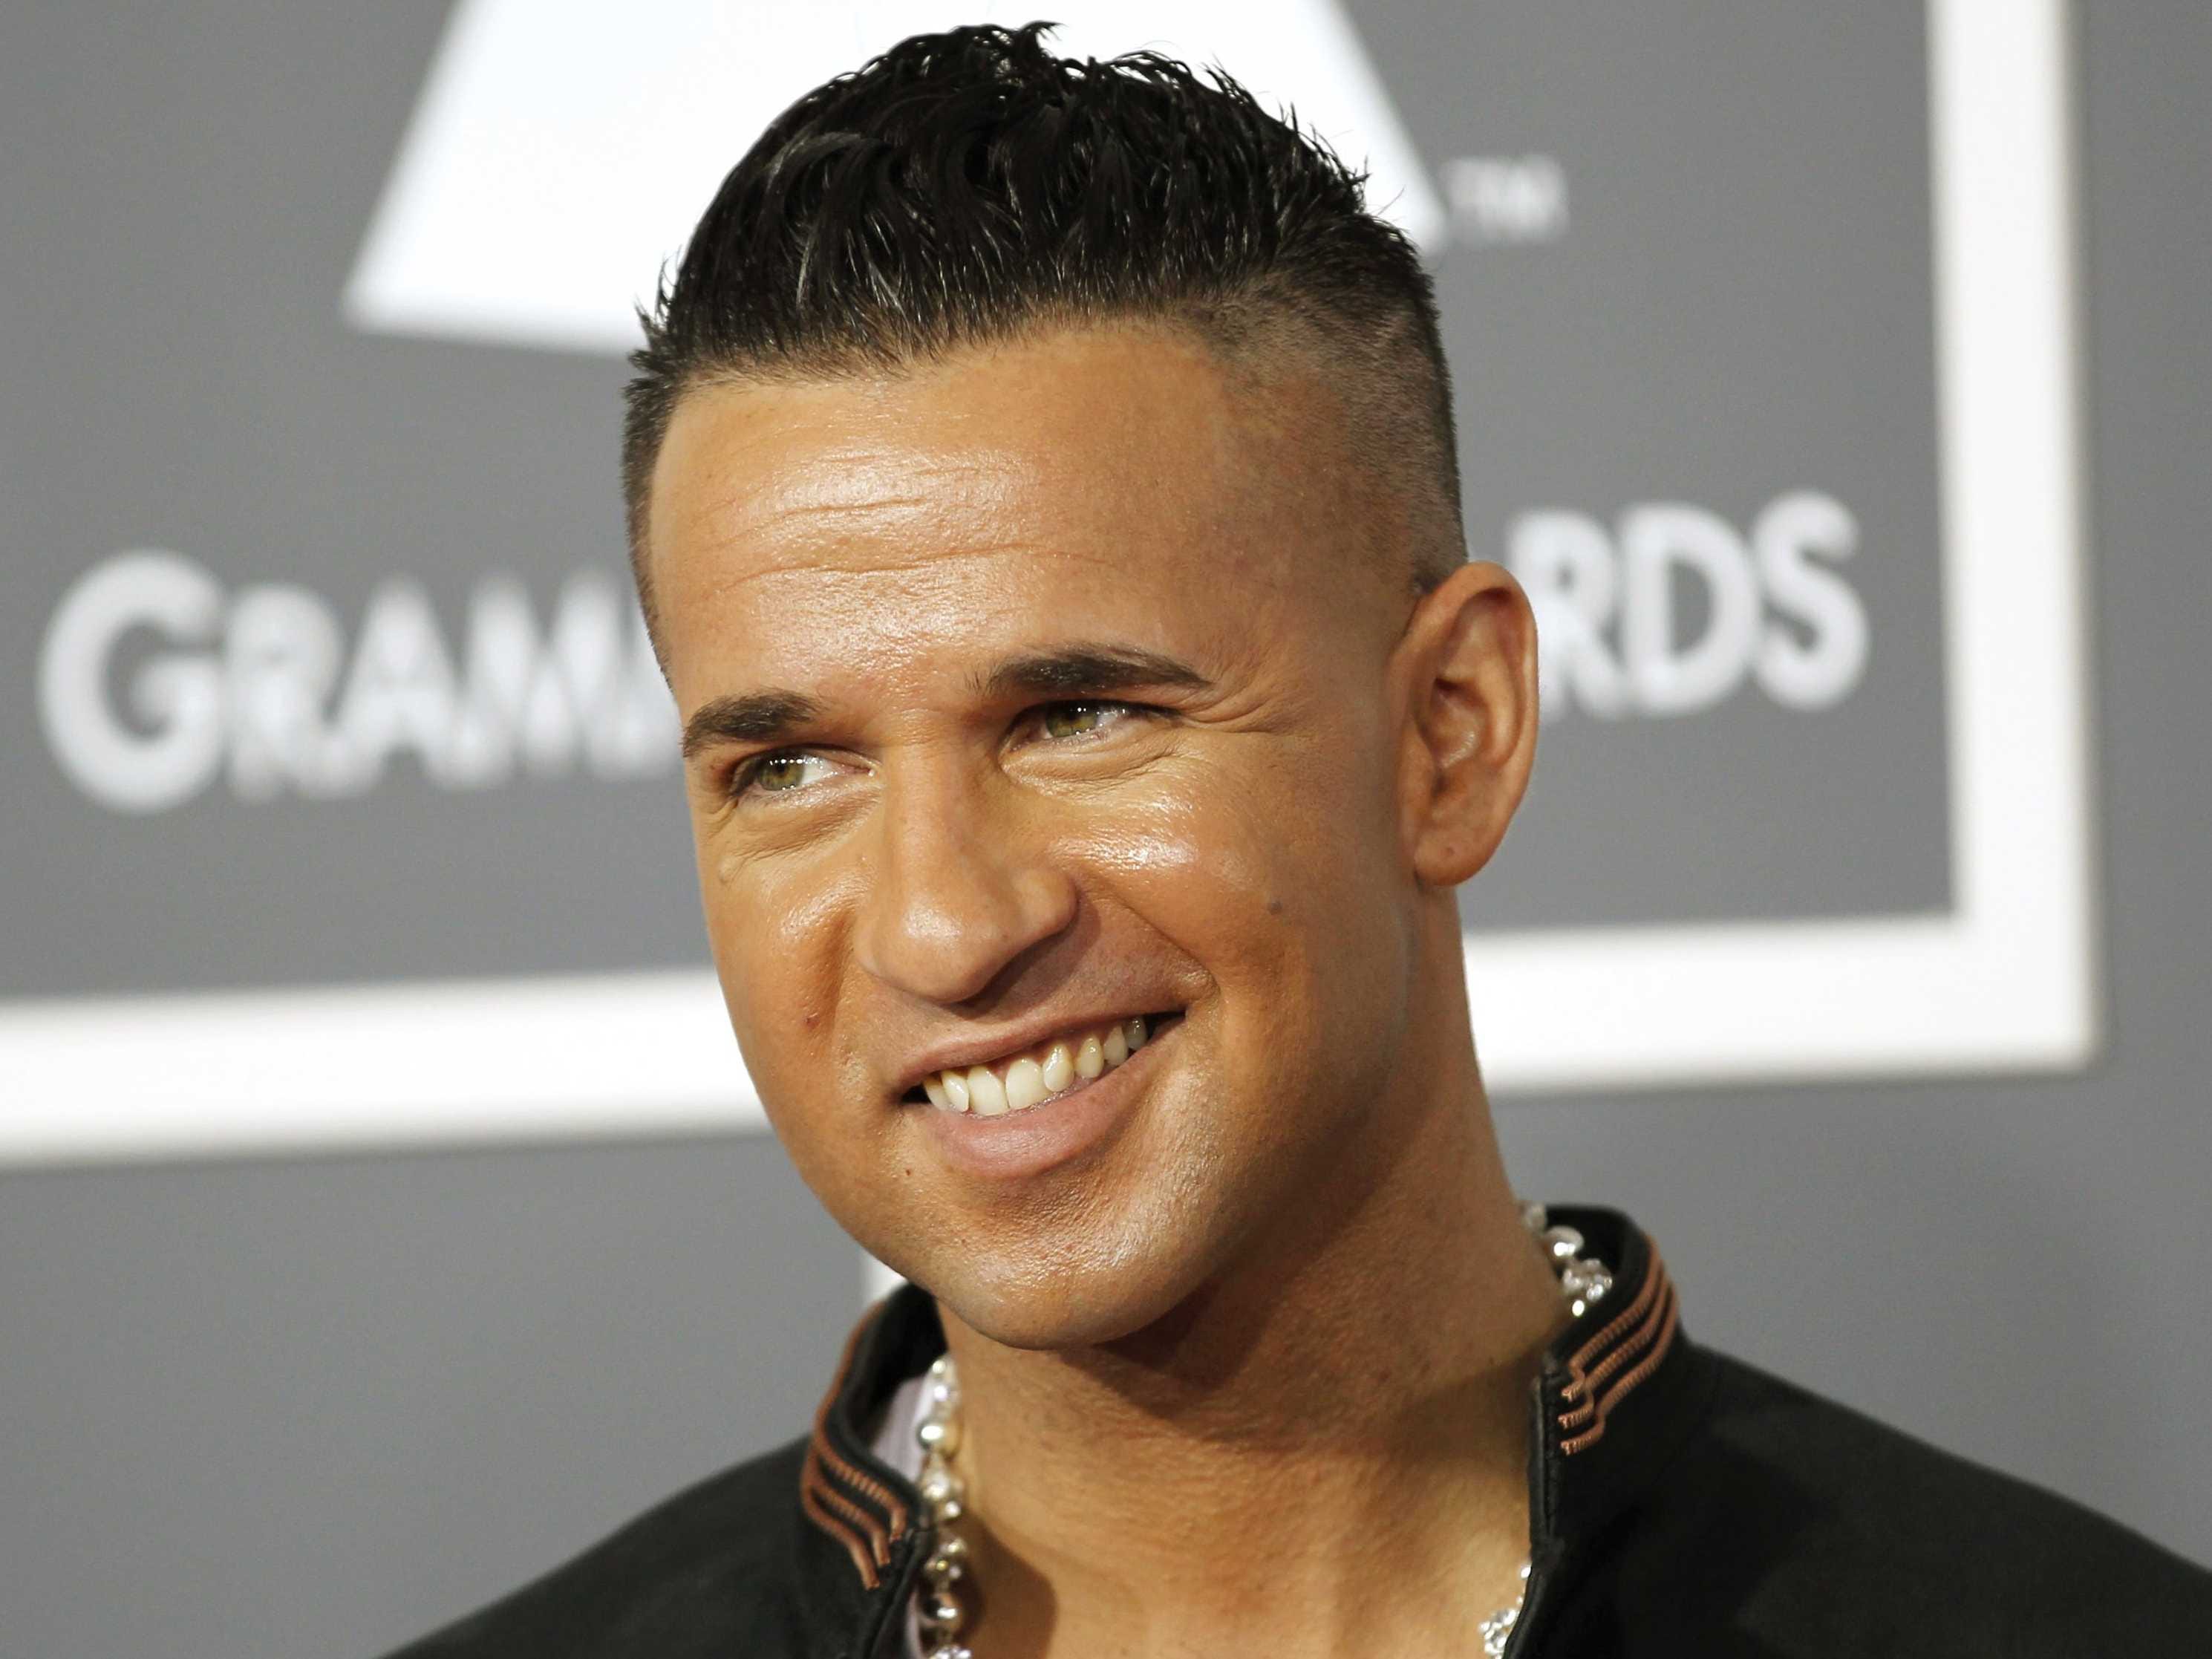 Mike „Die Situation“ Sorrentino